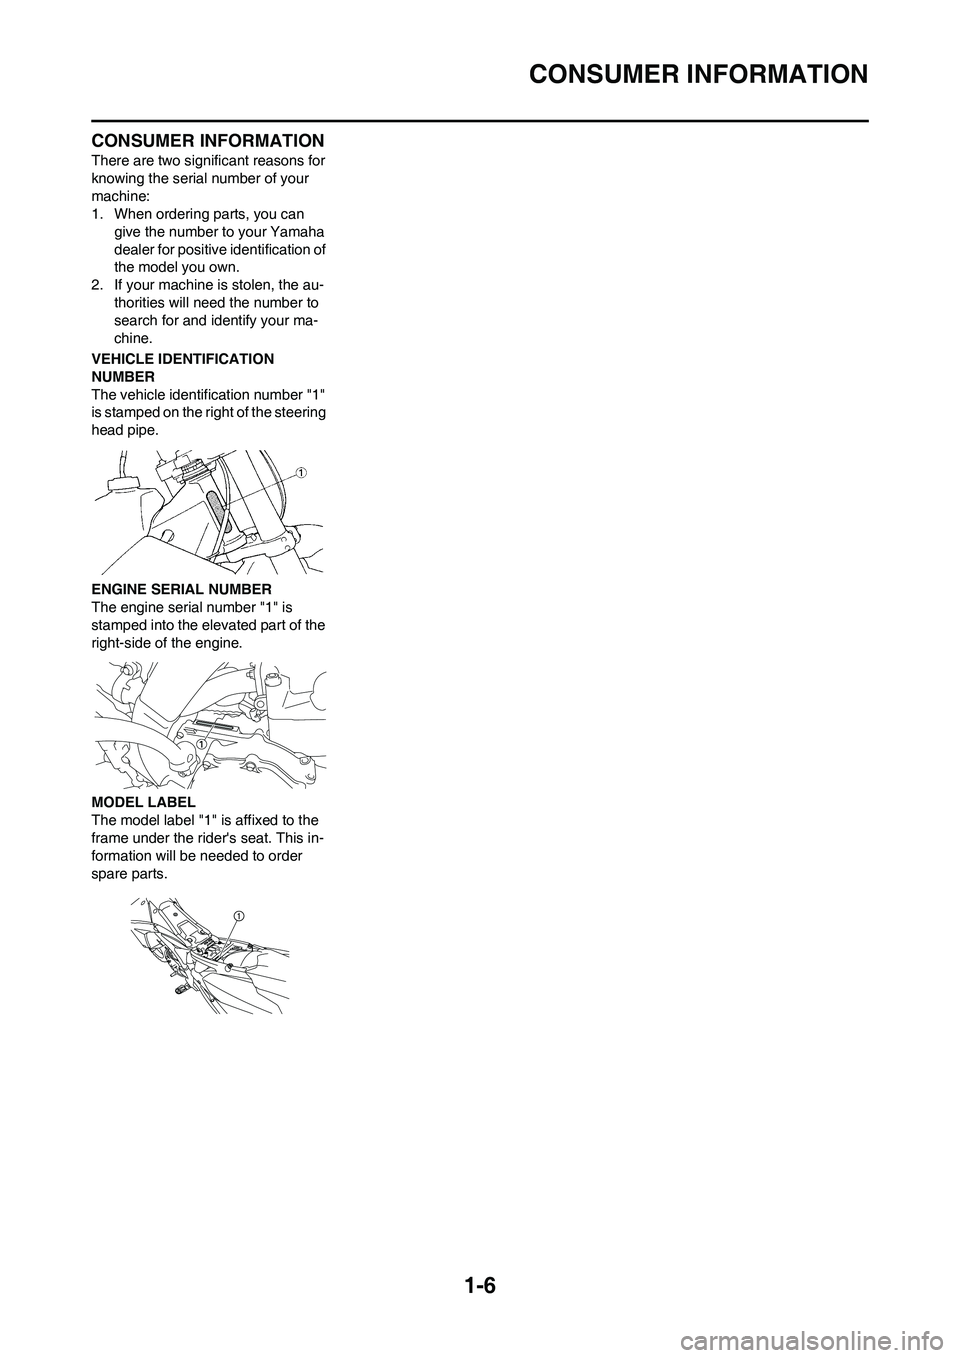 YAMAHA YZ450F 2010 User Guide 1-6
CONSUMER INFORMATION
CONSUMER INFORMATION
There are two significant reasons for 
knowing the serial number of your 
machine:
1. When ordering parts, you can 
give the number to your Yamaha 
dealer